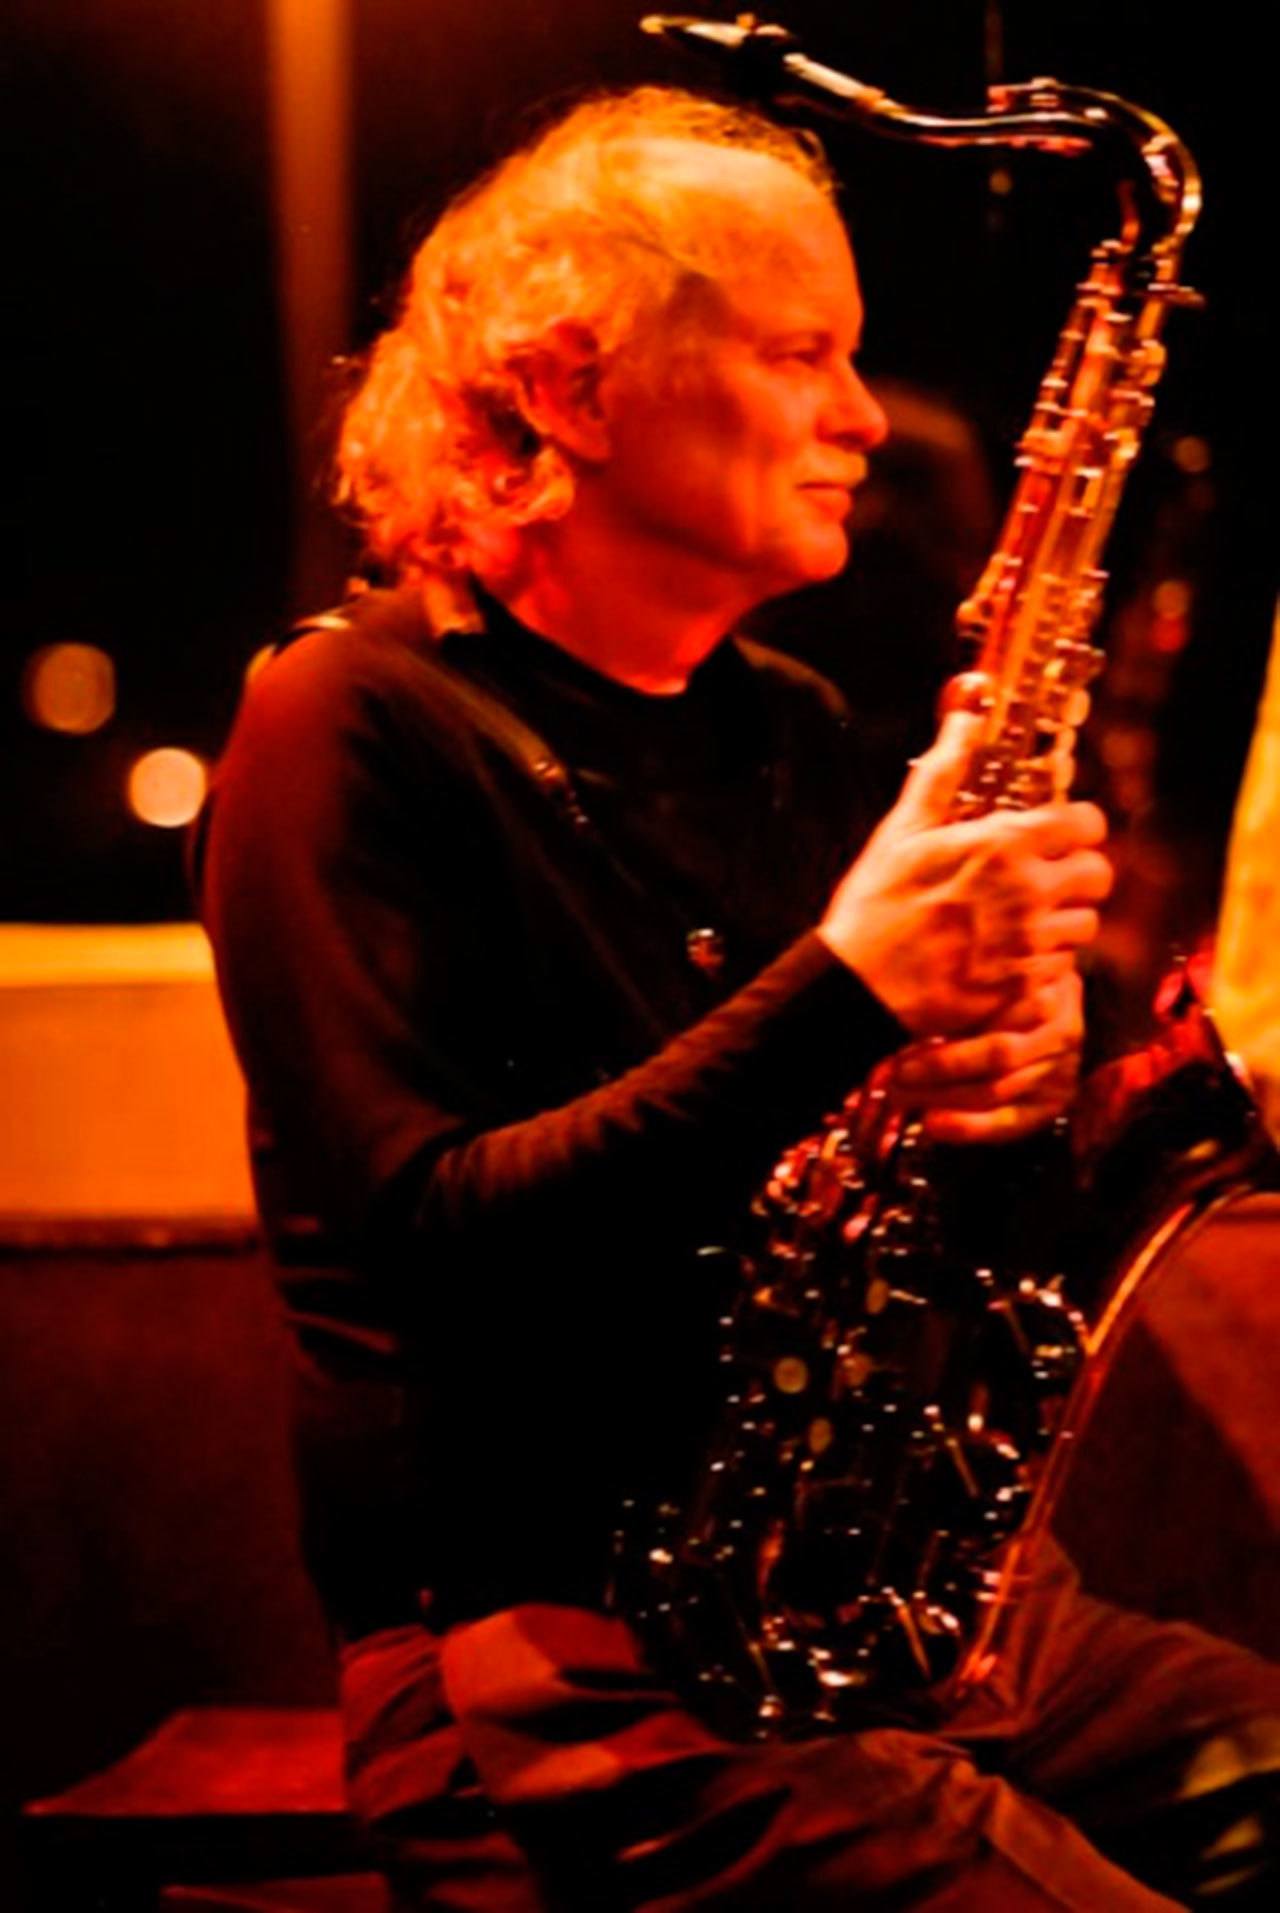 Saxophone player Craig Buhler, shown here, will perform with pianist Al Harris and singer Jessie Lee from 1:30 p.m. to 3:30 p.m. at the Pioneer Park clubhouse at 387 E. Washington St. in Sequim.